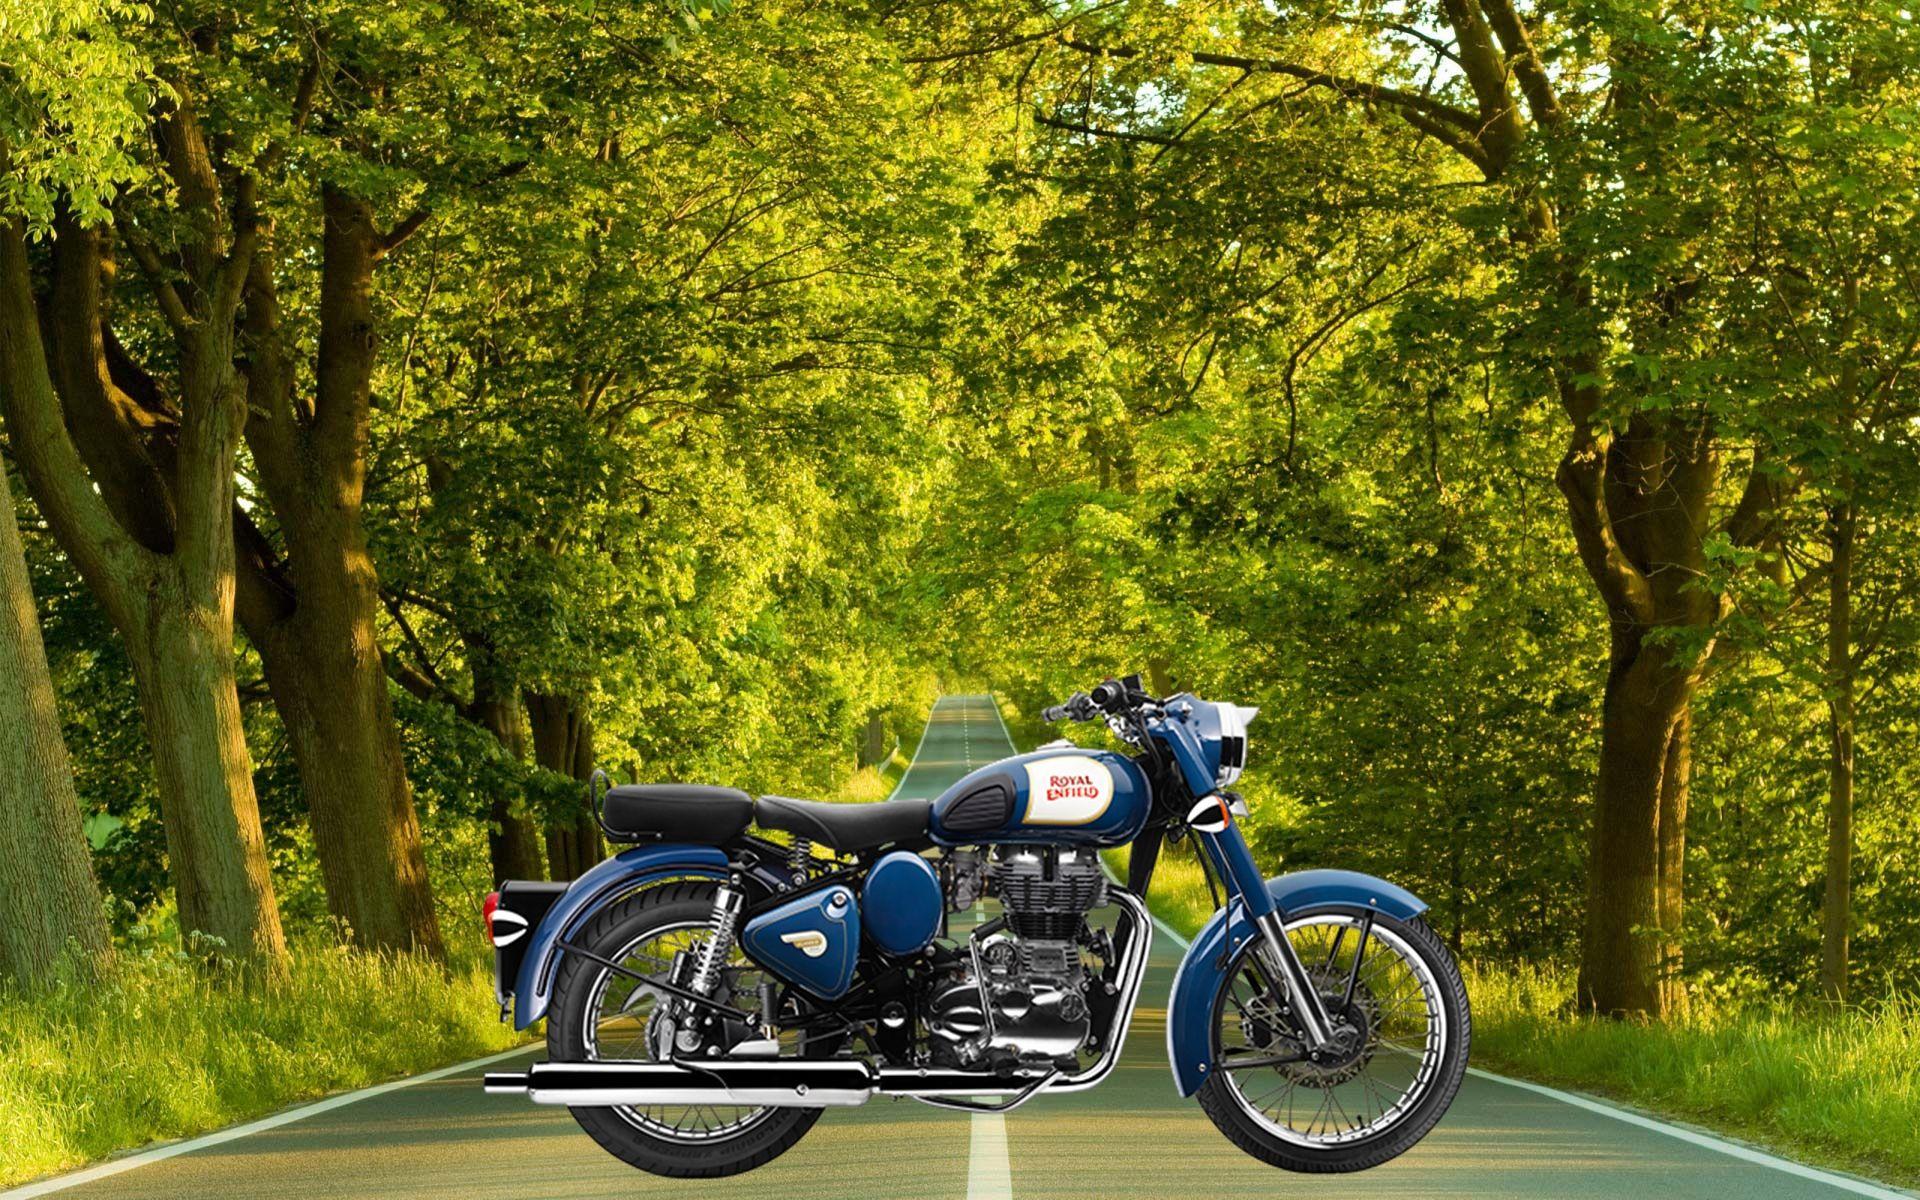 New Colors Of Royal Enfield Classic and Thunderbird